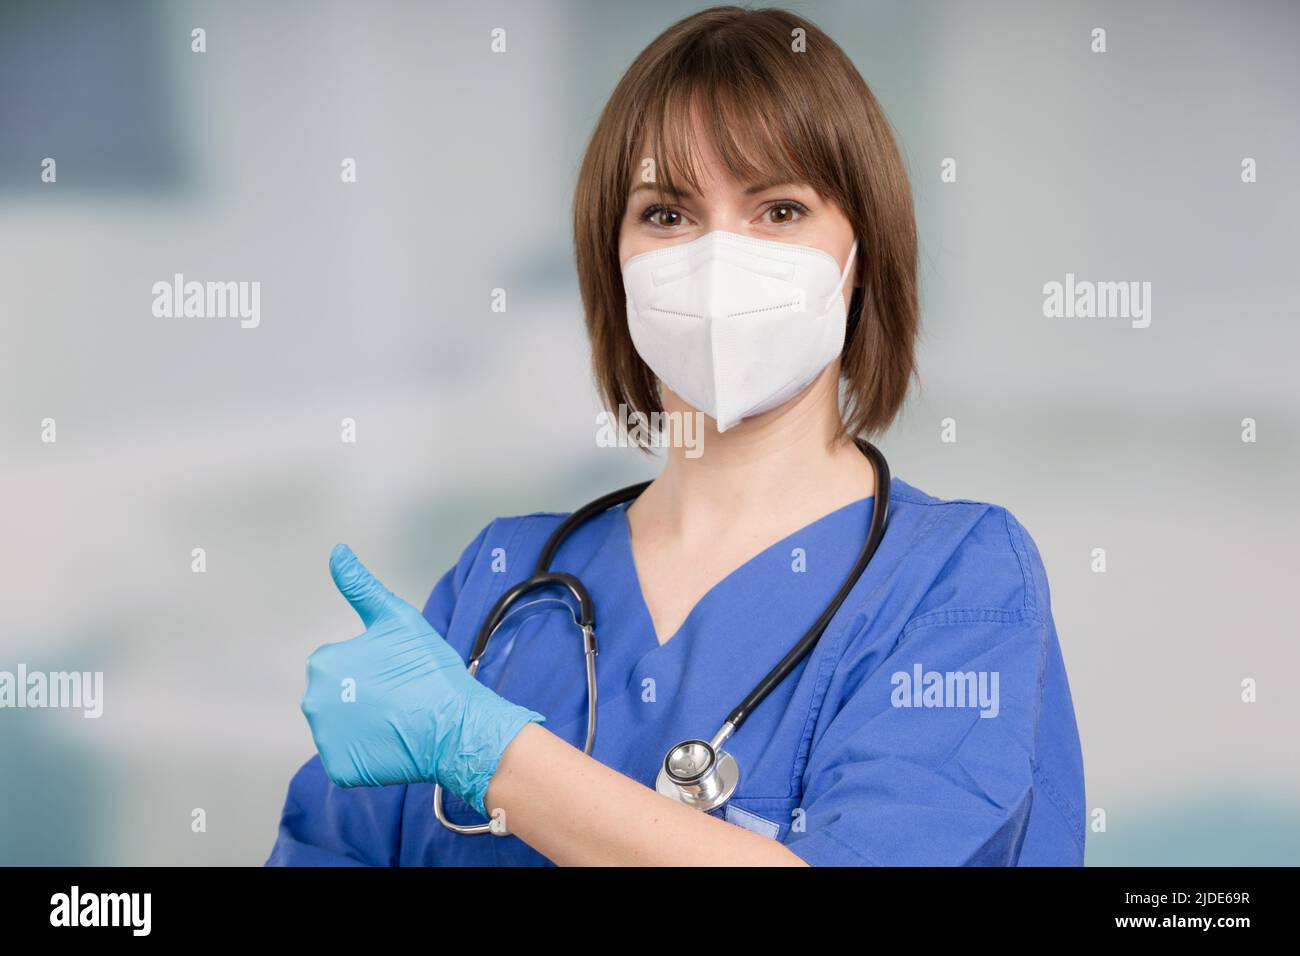 female doctor or icu nurse with medical face mask and medical gloves shows thumbs up Stock Photo